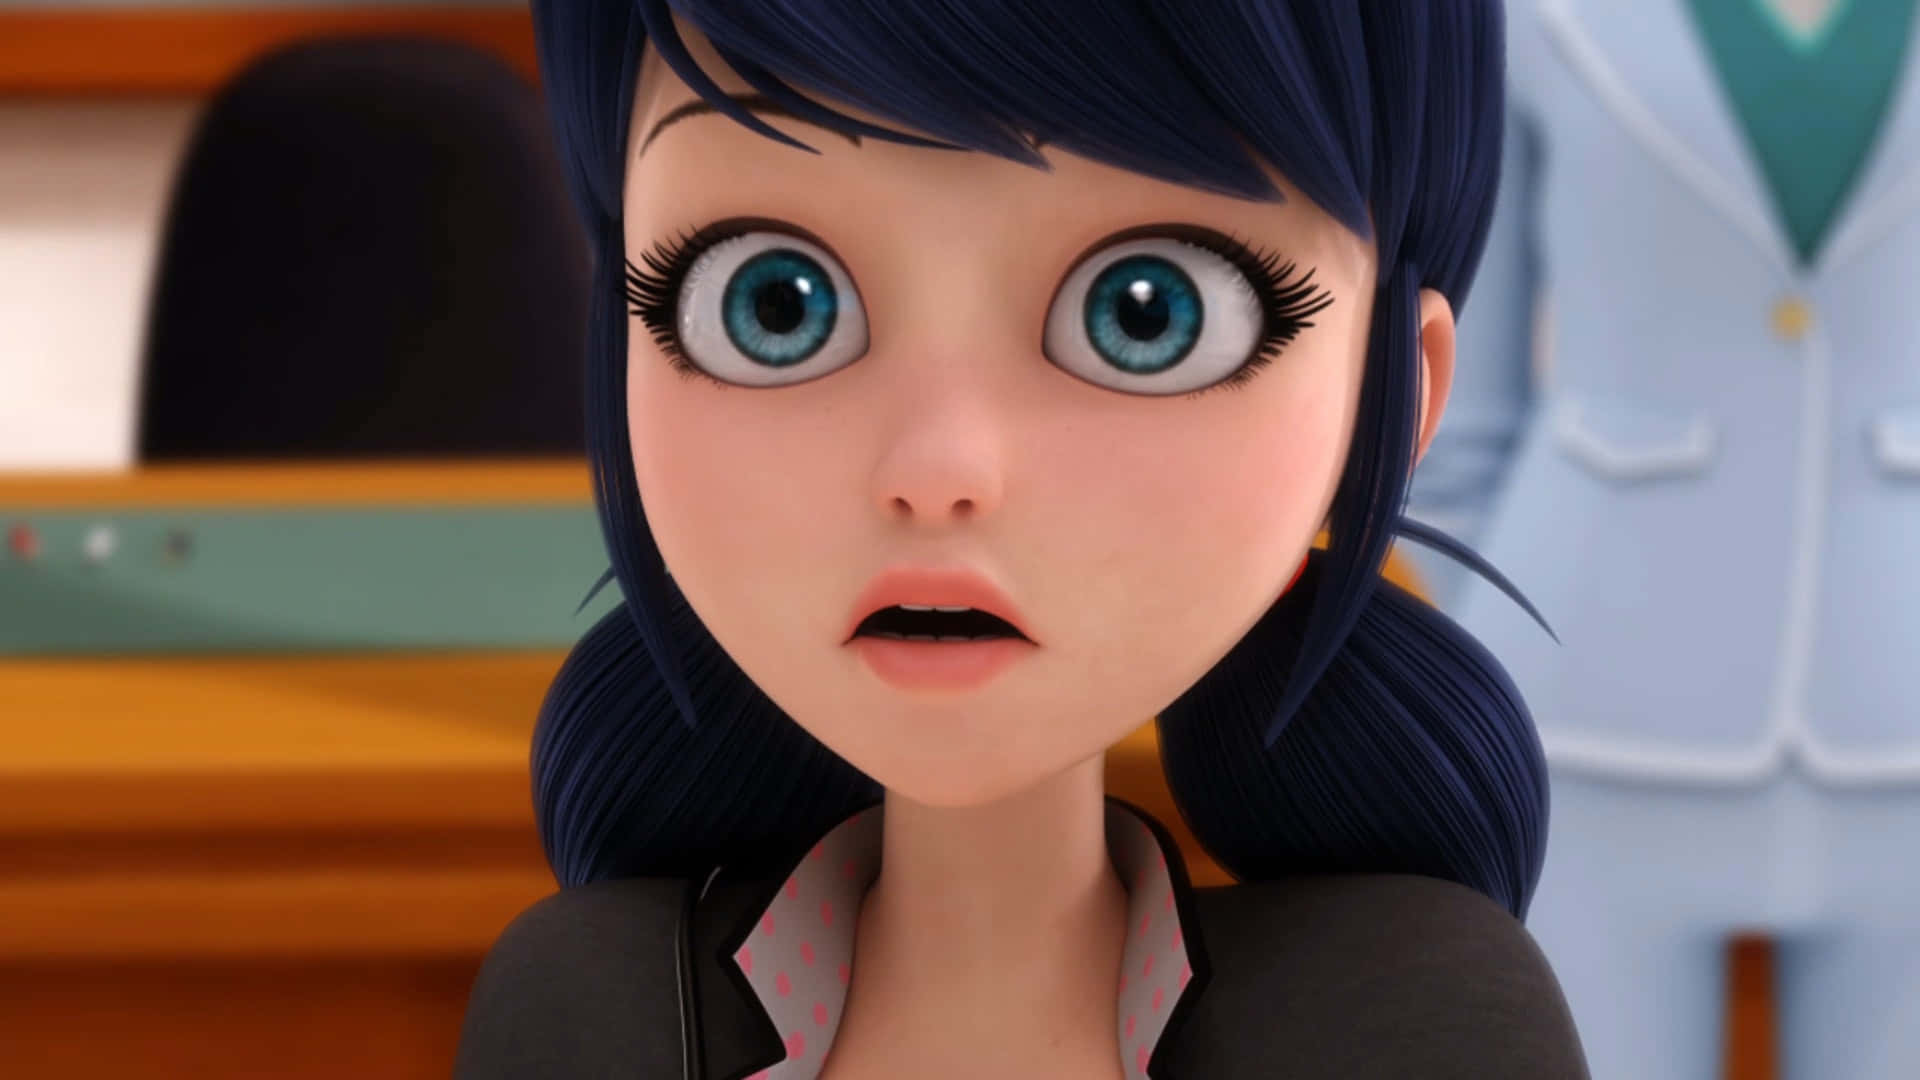 Marinette Dupain Cheng Surprised Expression Wallpaper